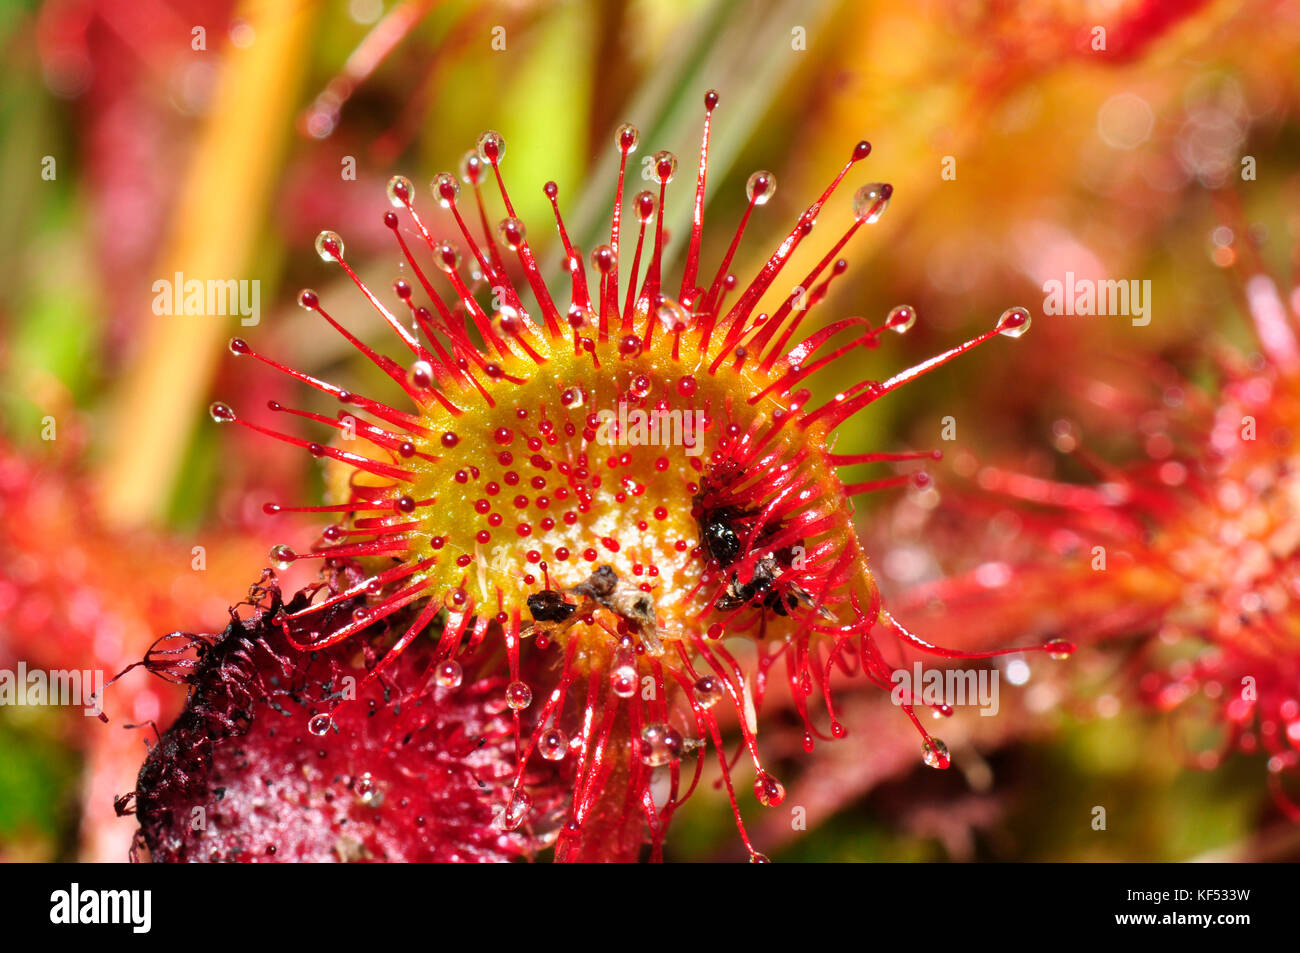 Round-leaved Sundew'Drosera rotundifolia' Carnivorous plant of boggy ground. Close up showing small insect on the sticky hairs of the 'pin-cushions'.  Stock Photo